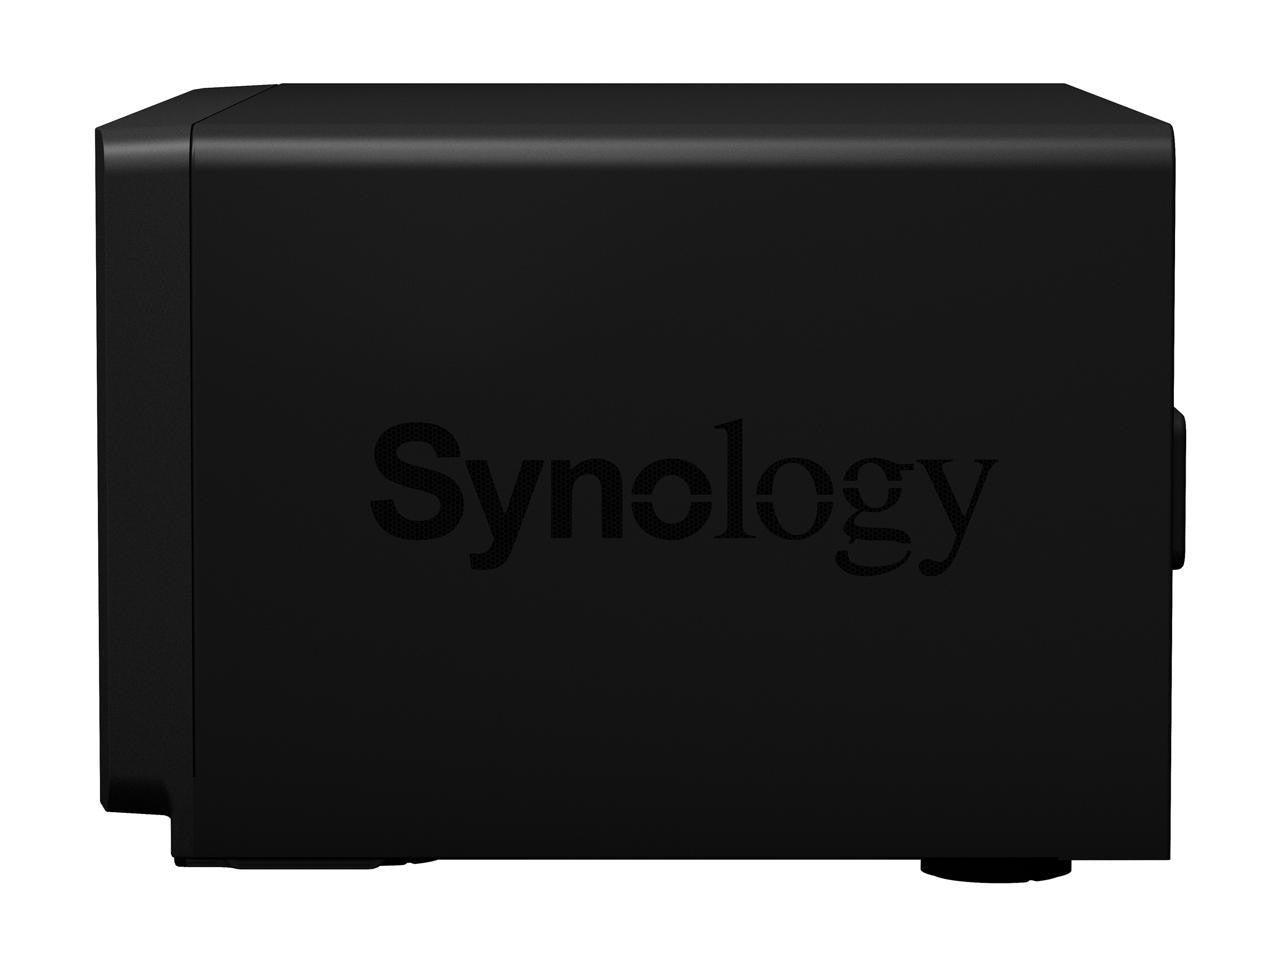 Synology DS1821+ 8-BAY DiskStation with 8GB RAM, 800GB (2x400GB) Cache and 64TB (8 x 8TB) of Synology Enterprise HAT5300 Drives Fully Assembled and Tested